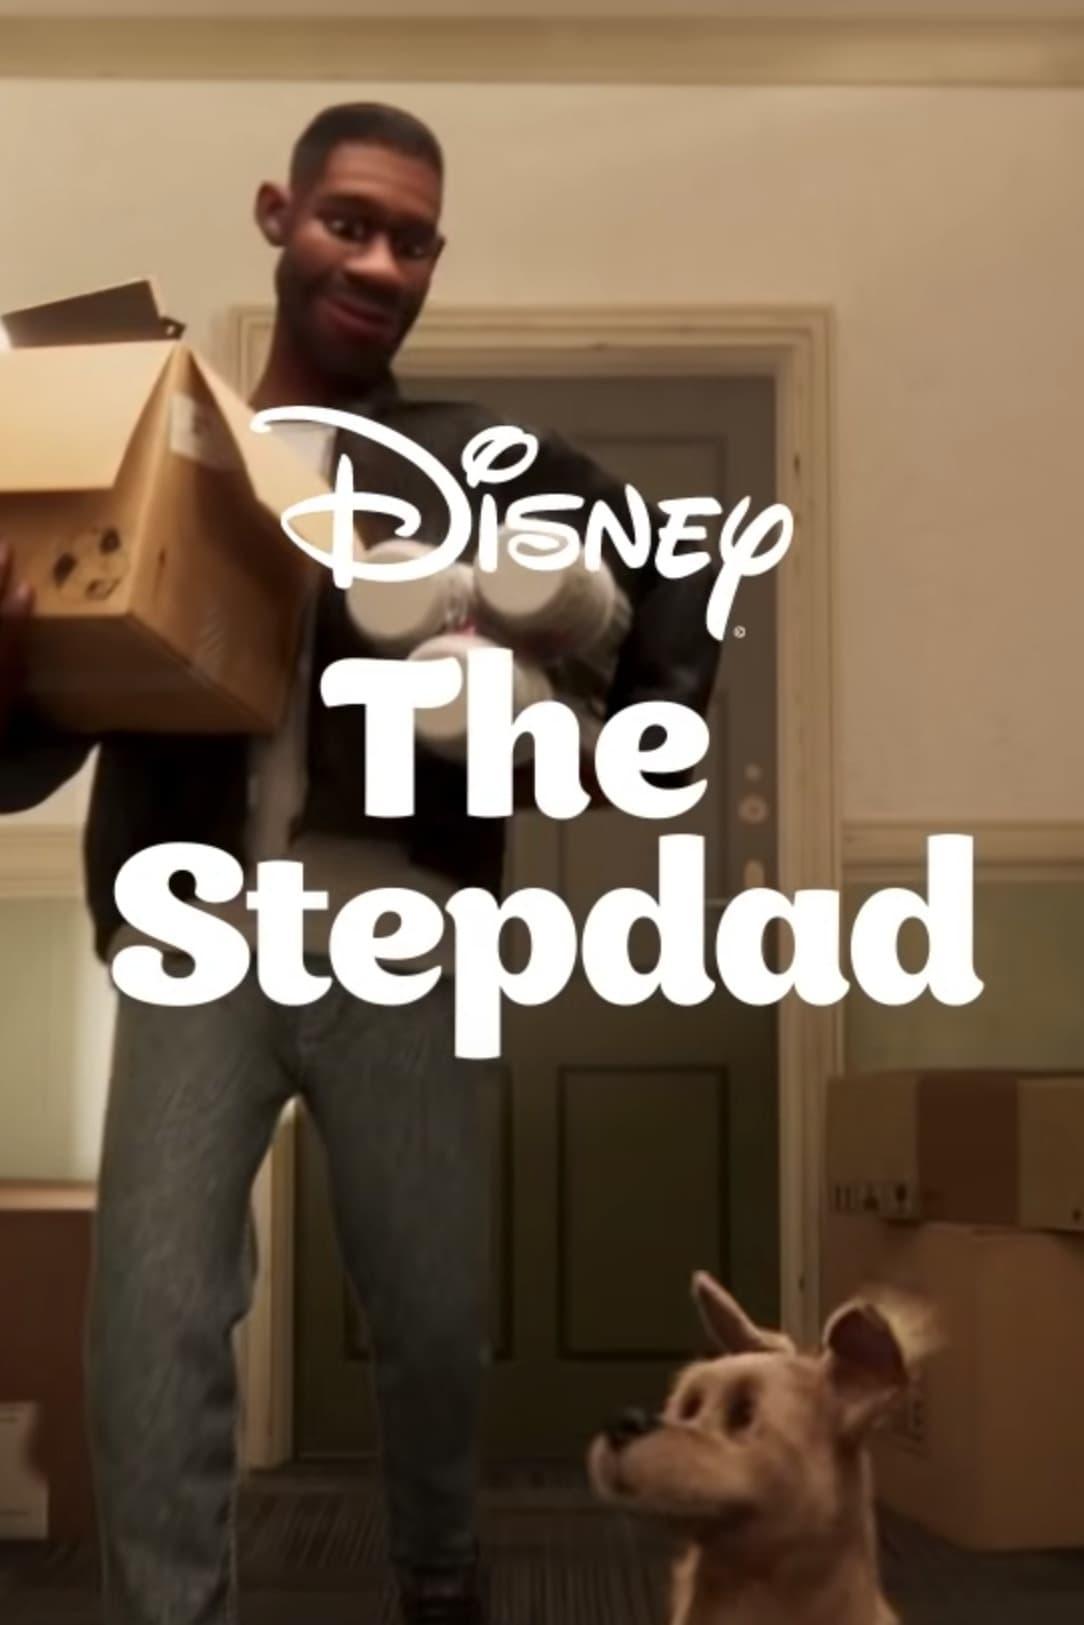 The Stepdad poster